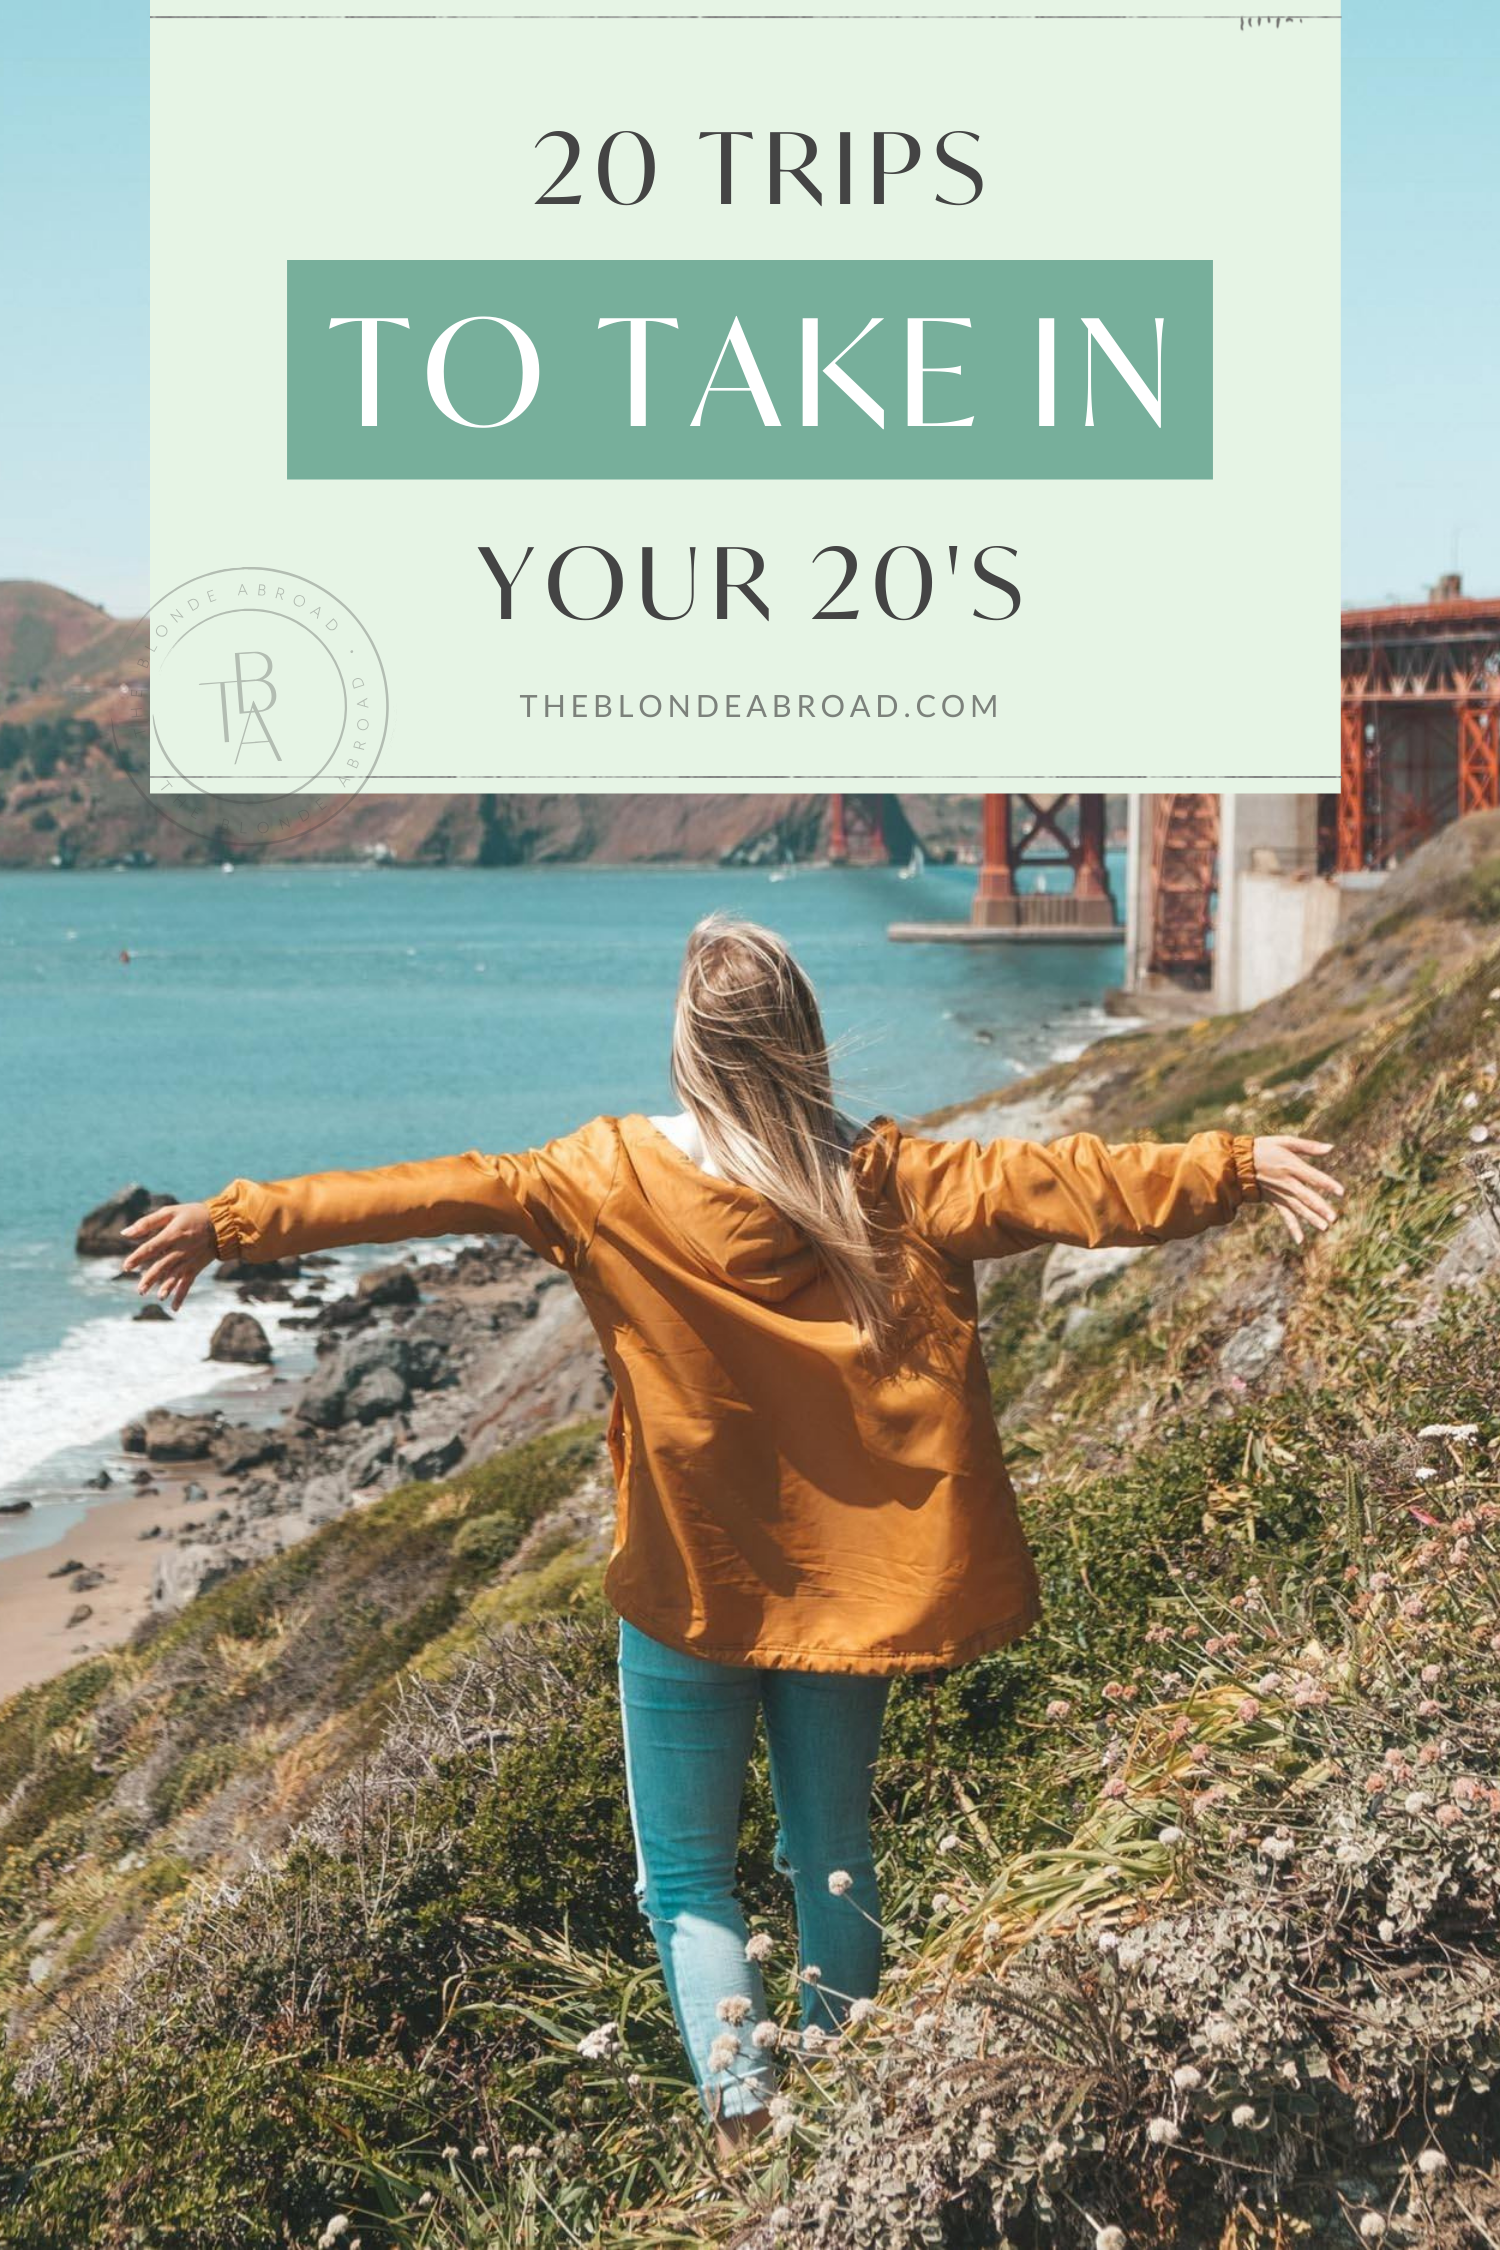 20 Trips to Take in Your 20’s